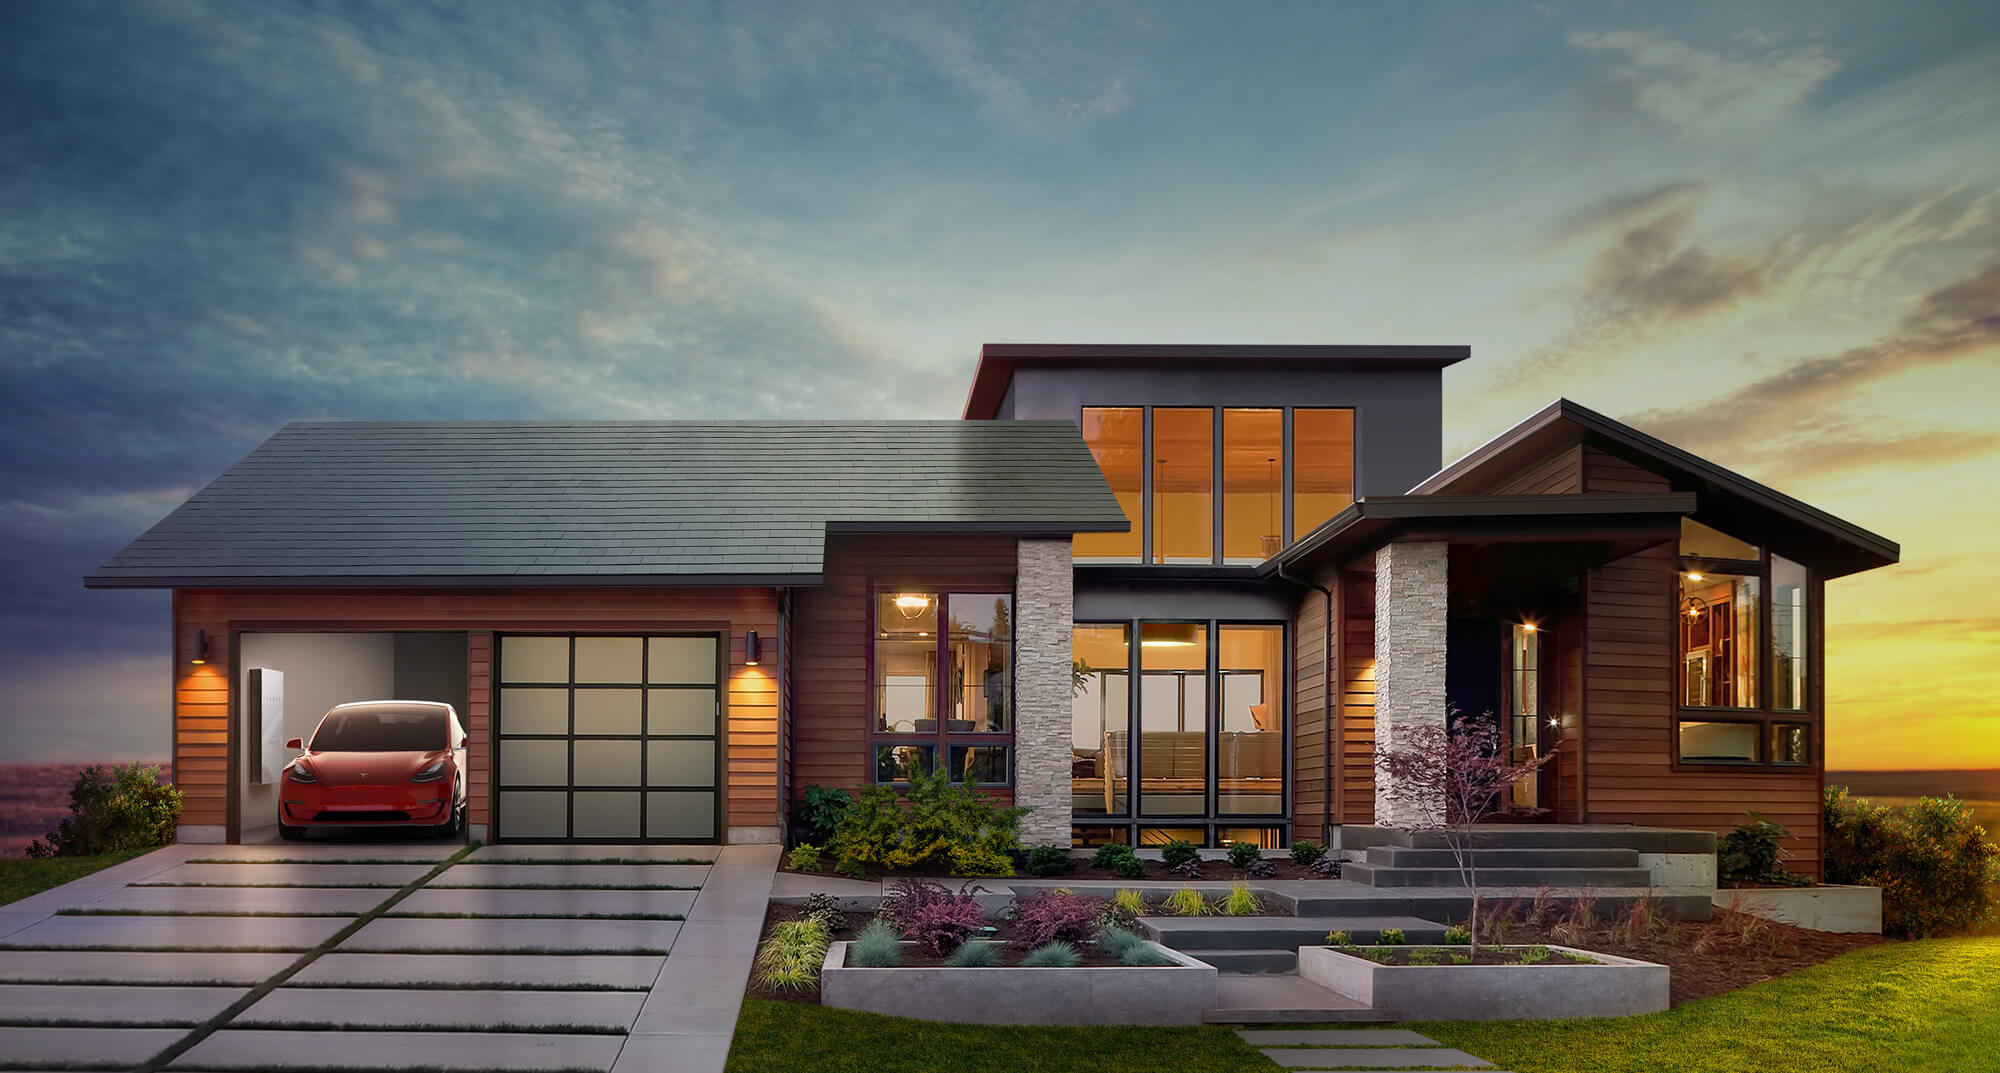 Tesla solar roof installations are now coming online